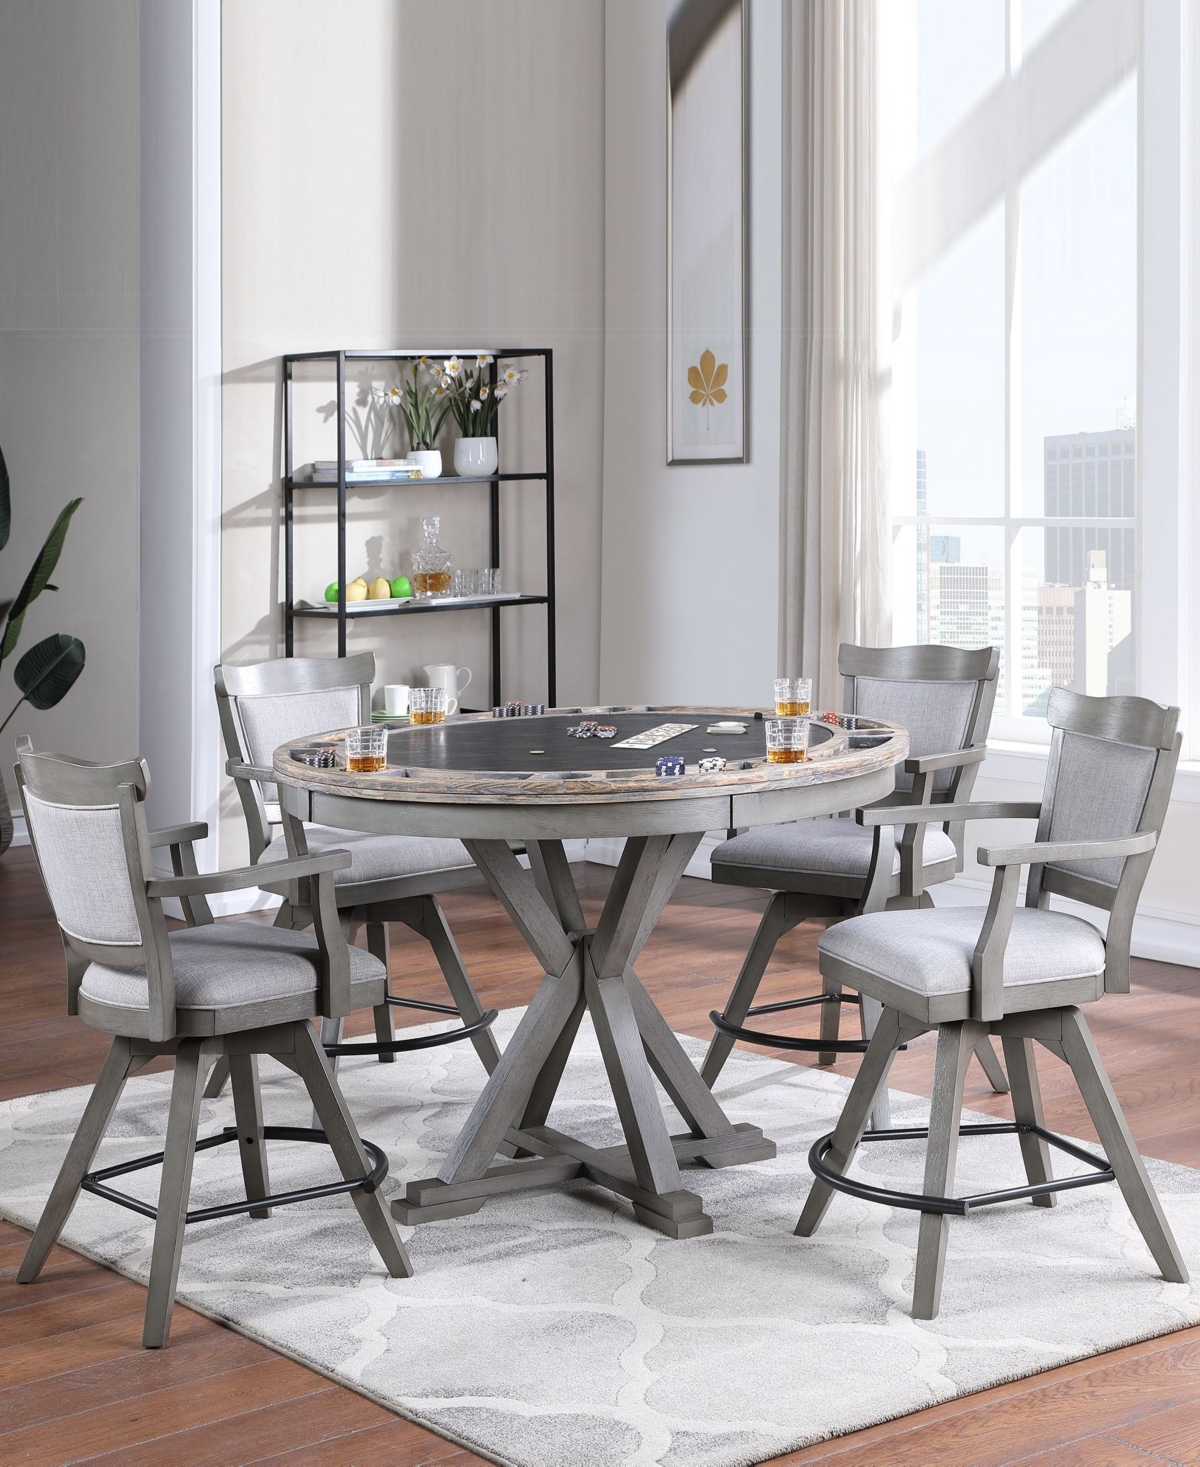 Albany Crest 5 Piece Counter Height Game Set (Convertible Table and 4 stools)